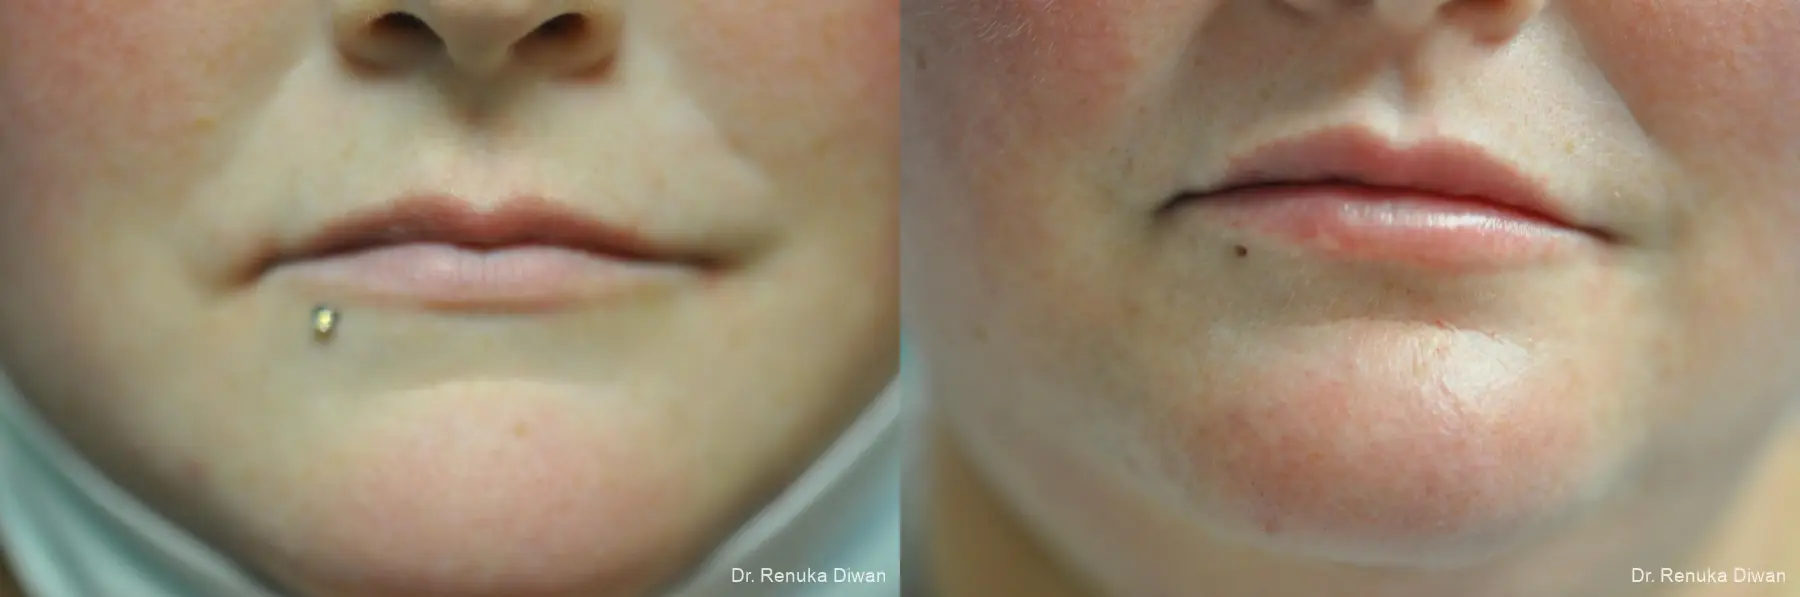 Lip Augmentation: Patient 19 - Before and After 1